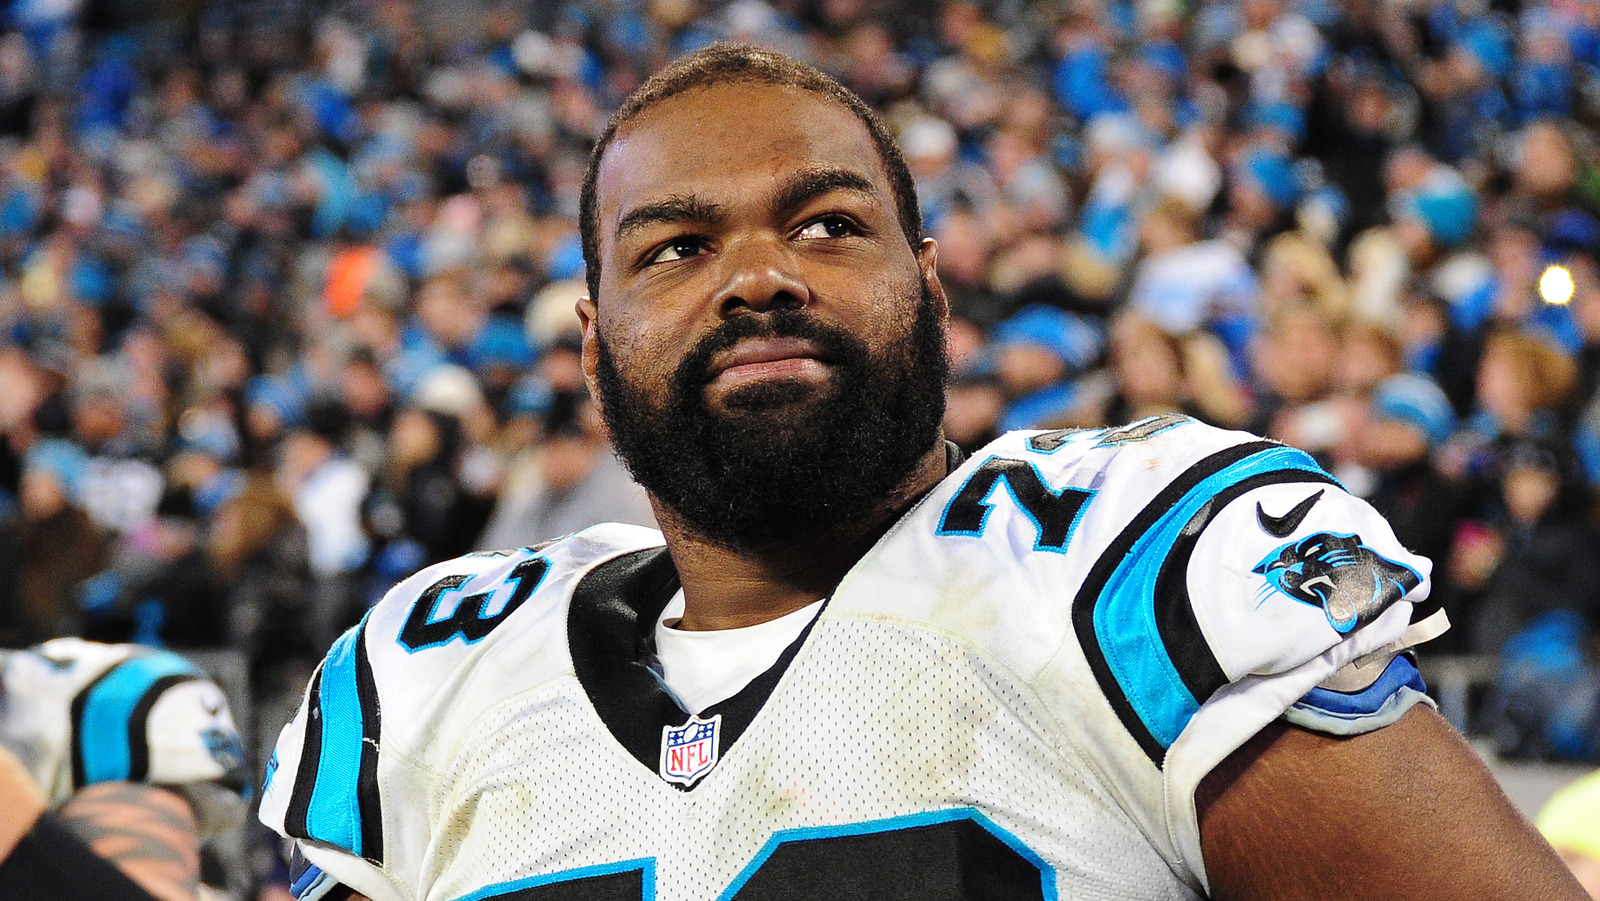 The Blind Side Adoption Story Is A Lie That Cost NFL's Michael Oher Millions